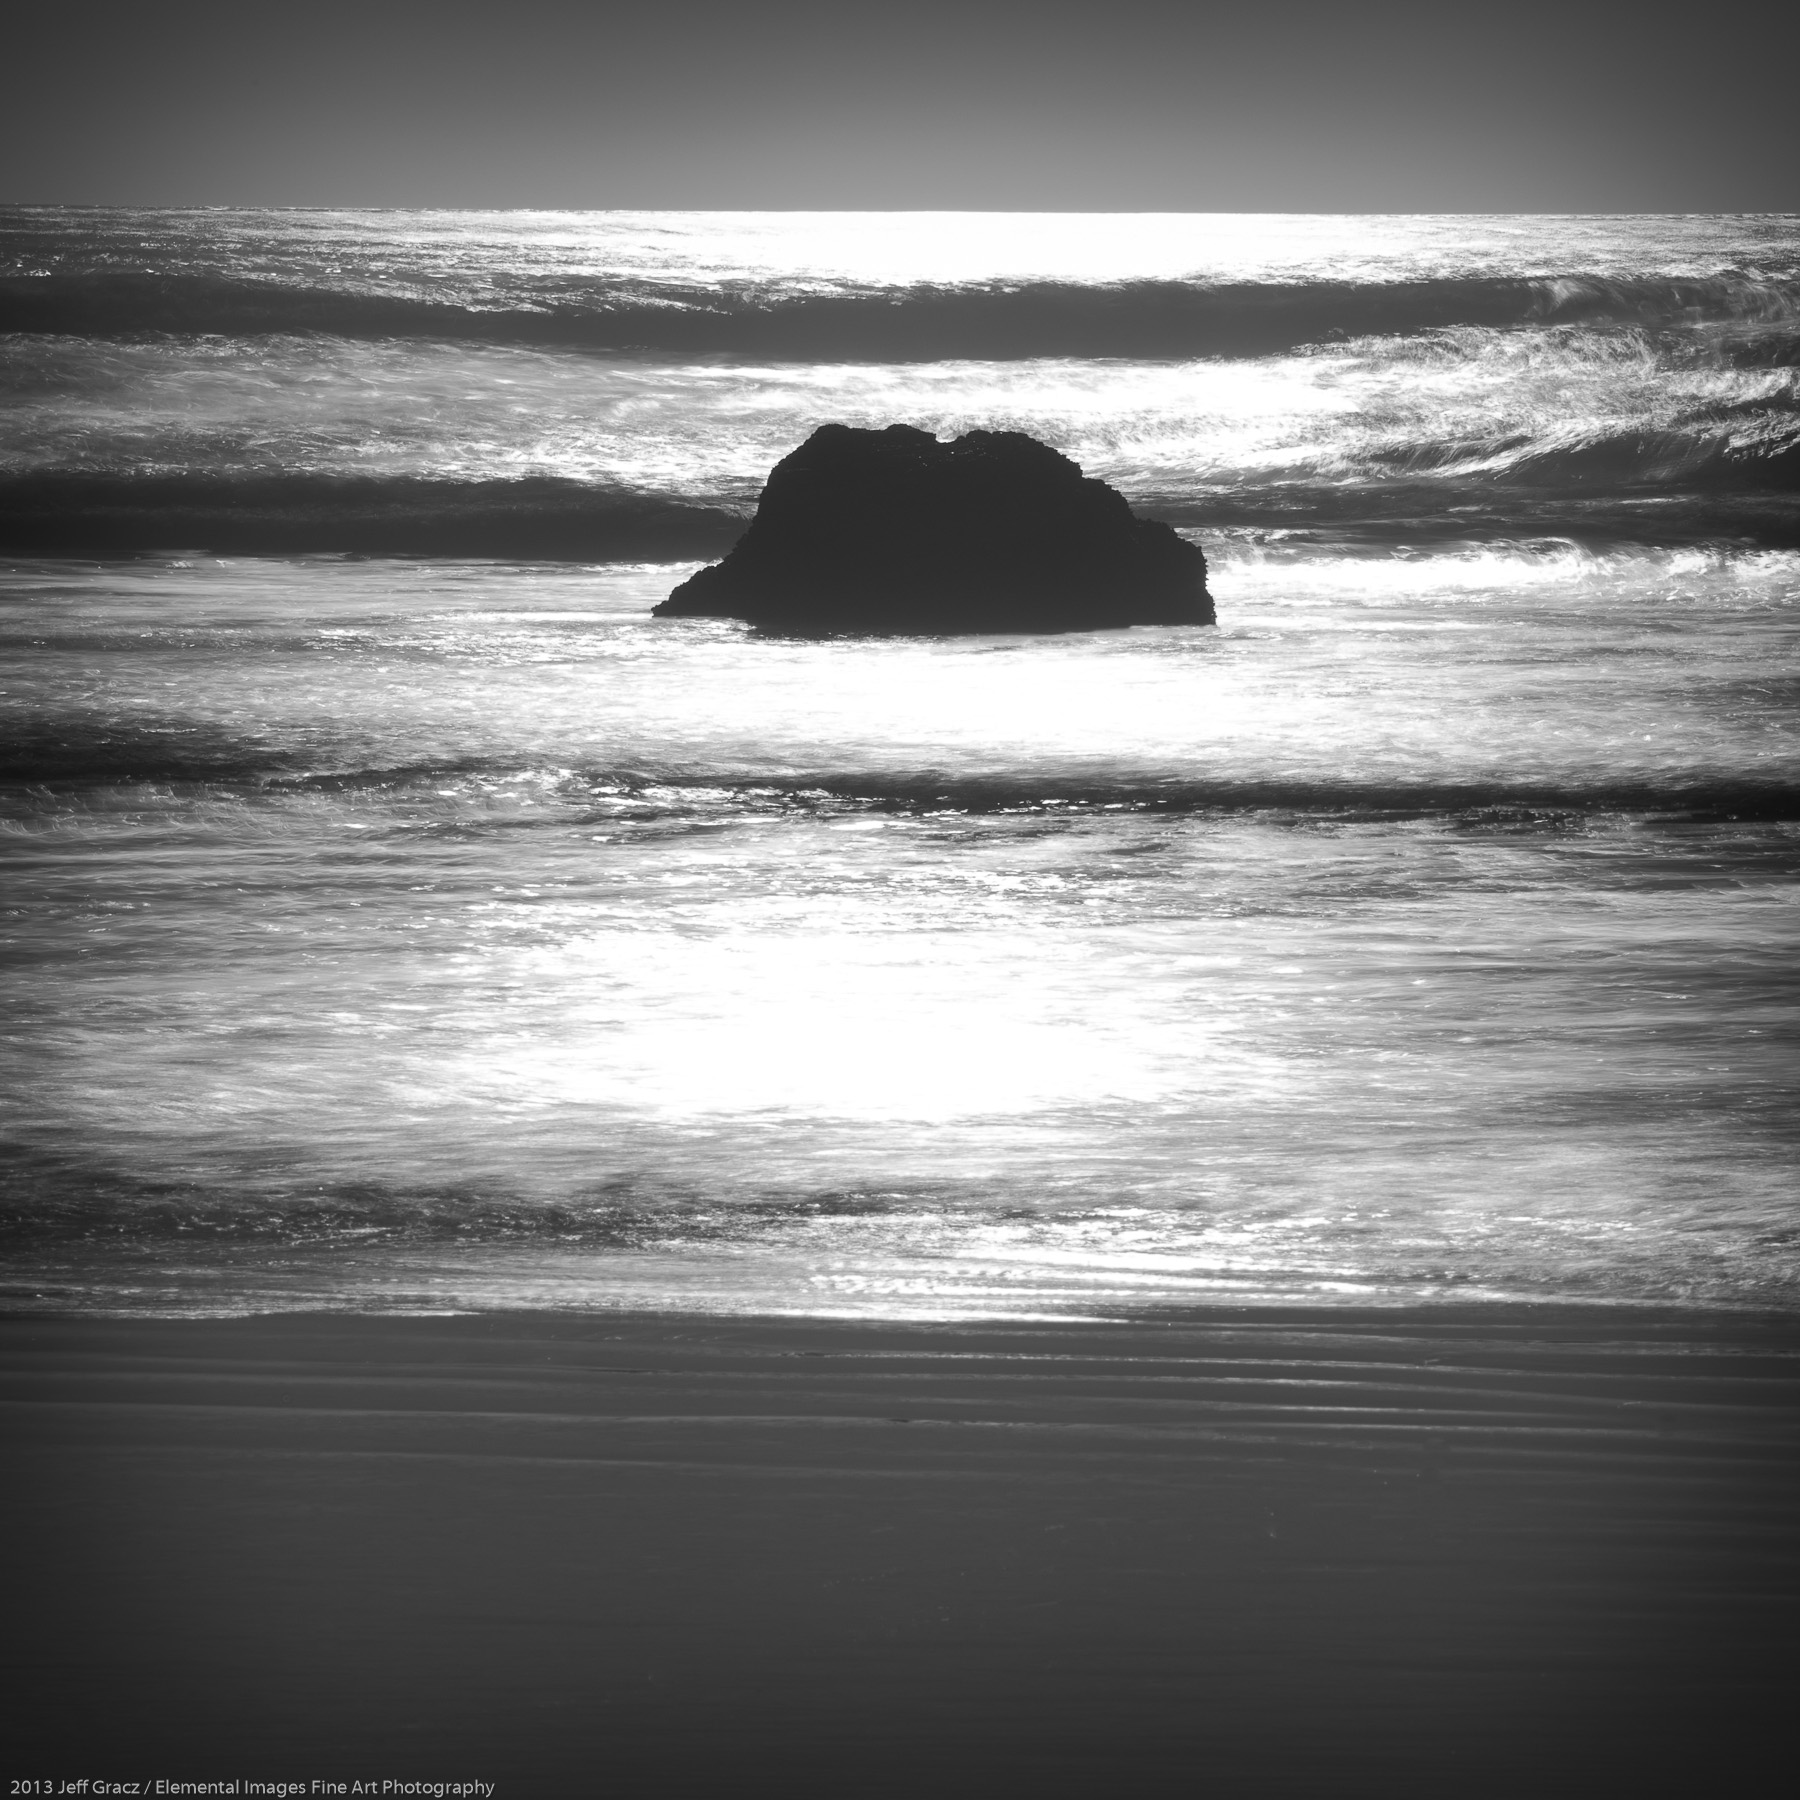 Zen Rocks VI | Cannon Beach | OR | USA - © 2013 Jeff Gracz / Elemental Images Fine Art Photography - All Rights Reserved Worldwide